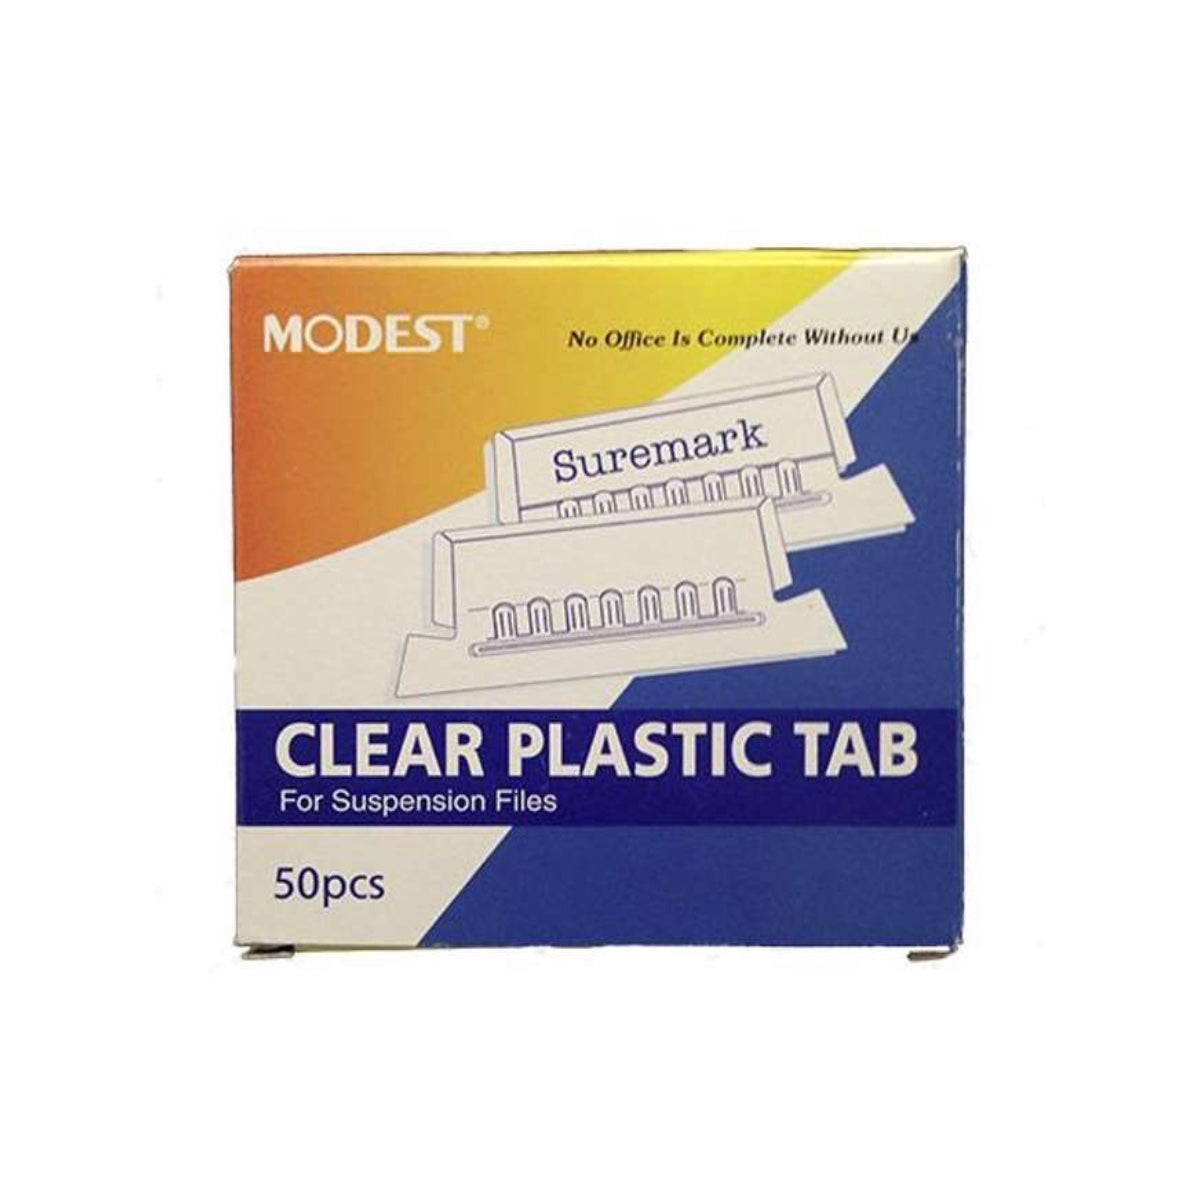 Modest Clear Plastic Tab for Suspensions Files, 50/pack